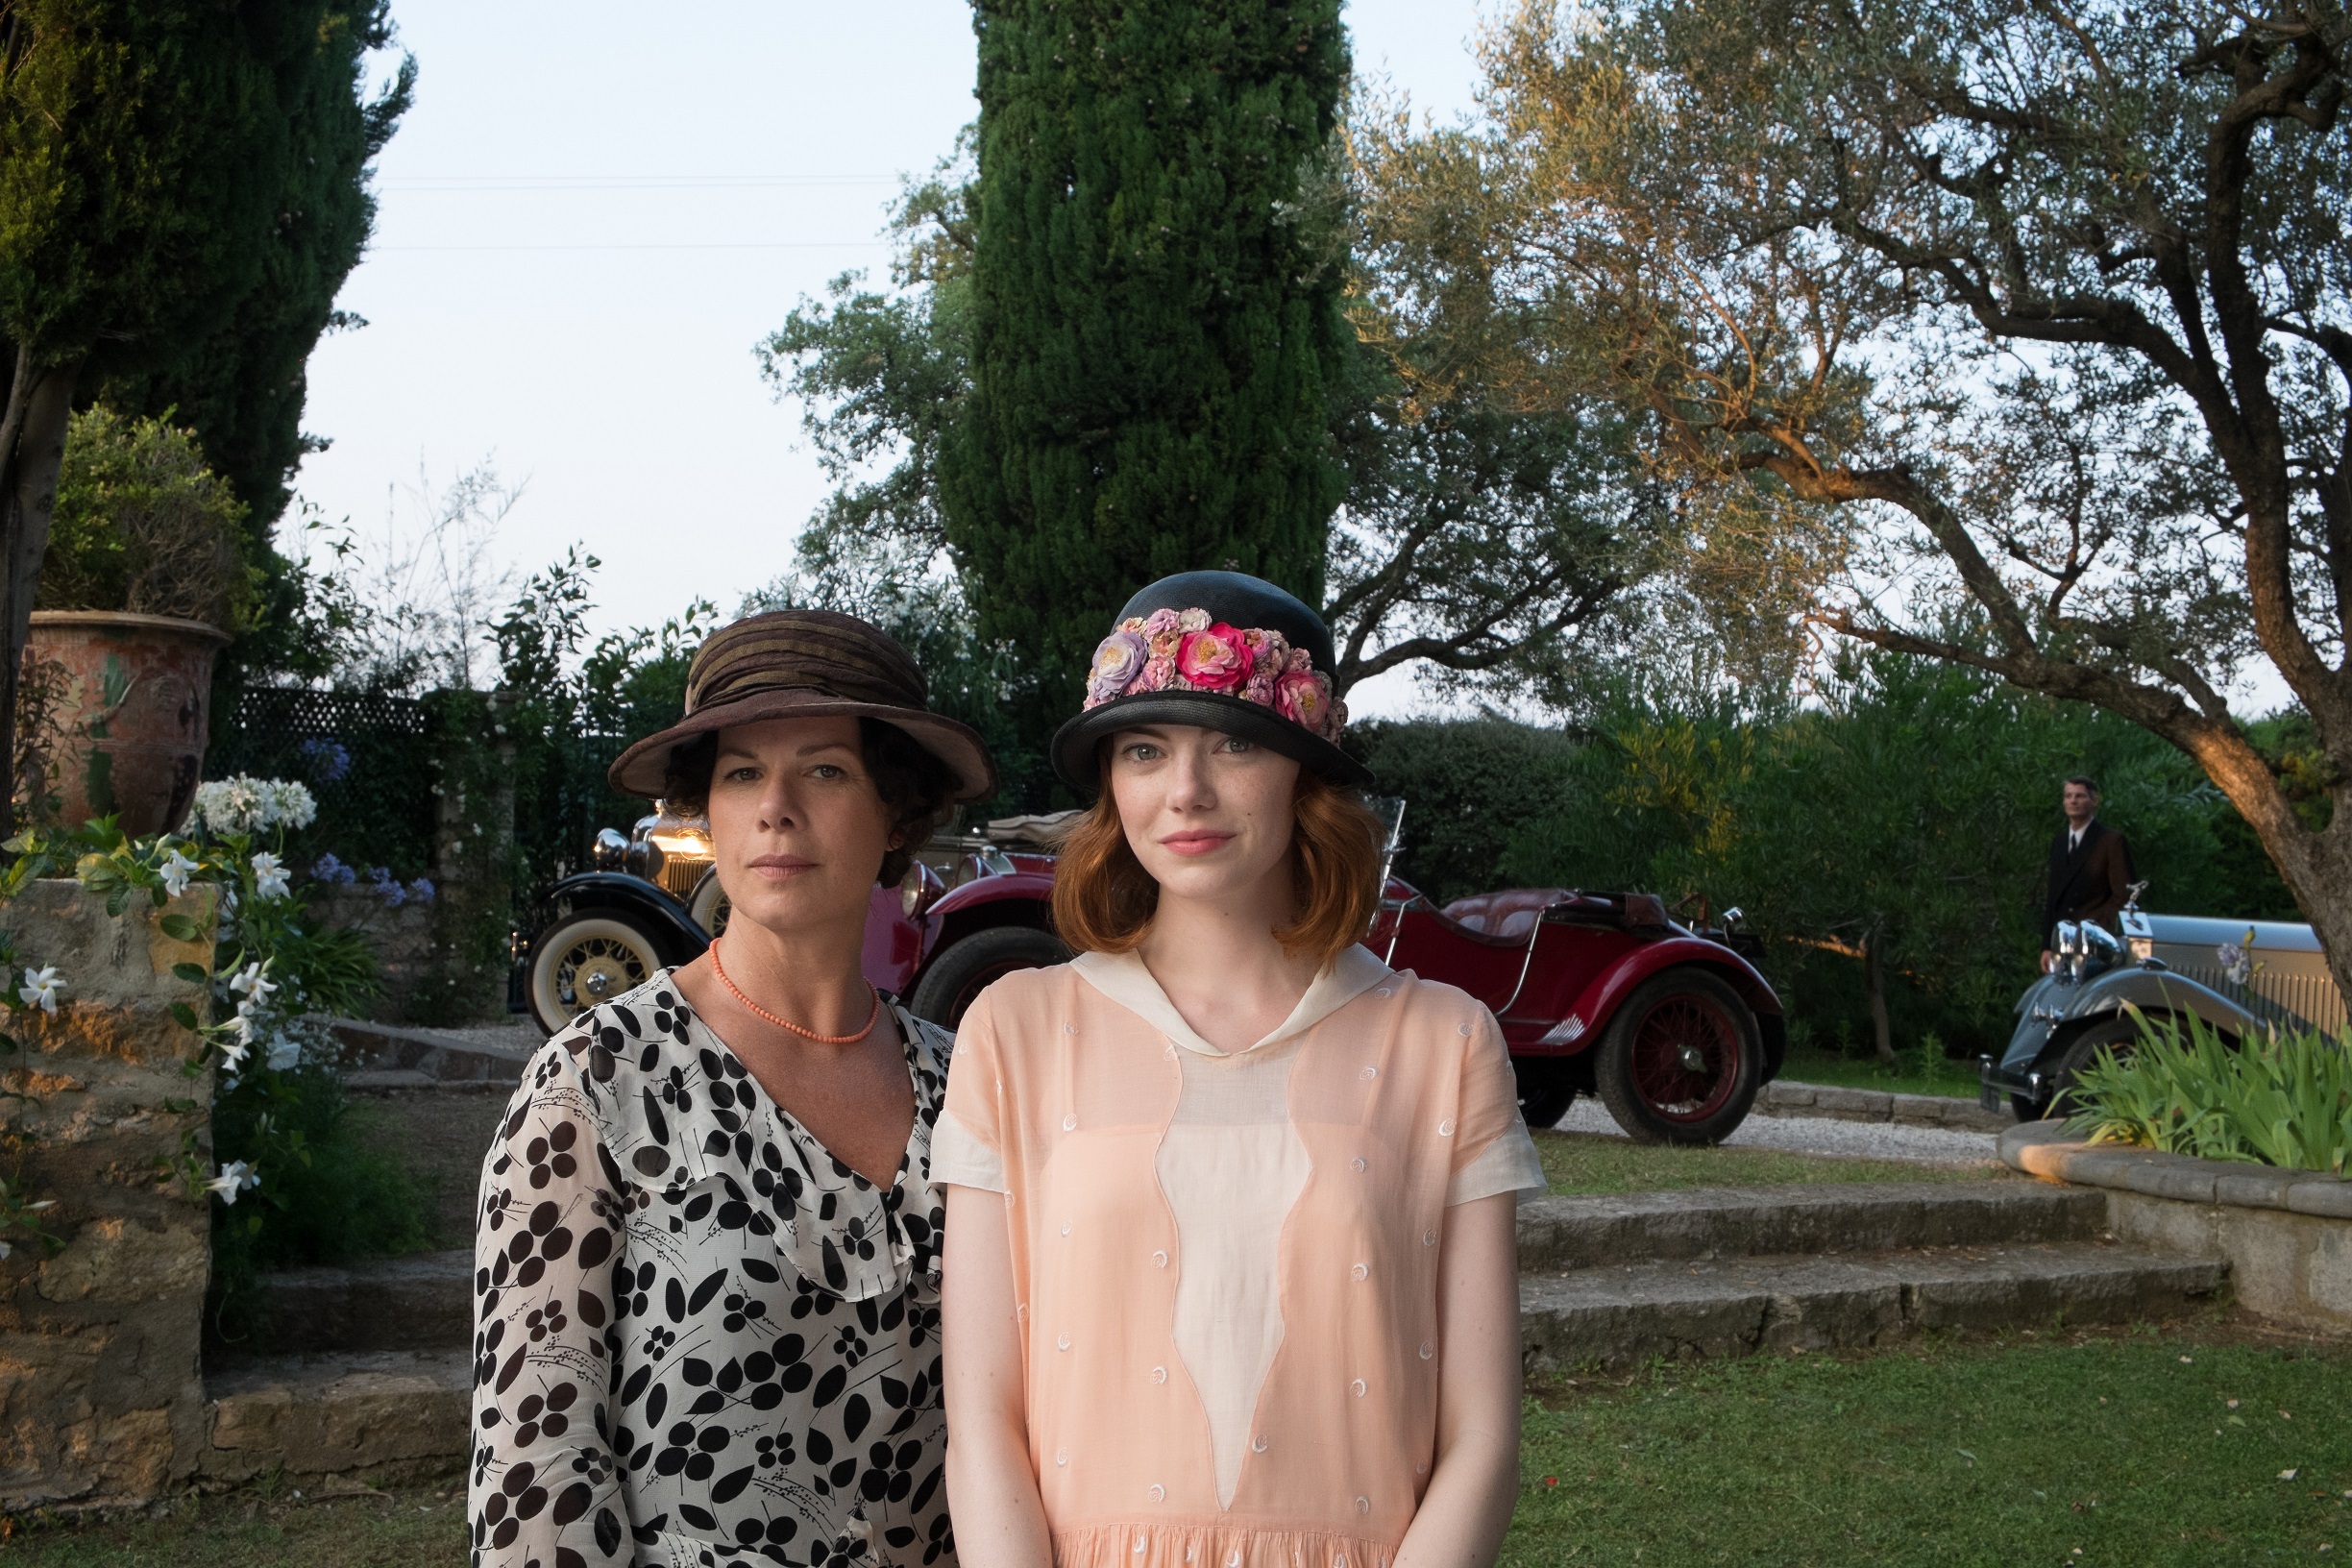 Magic-in-the-Moonlight-Official-Poster-Banner-PROMO-PHOTOS-24JULHO2014-03